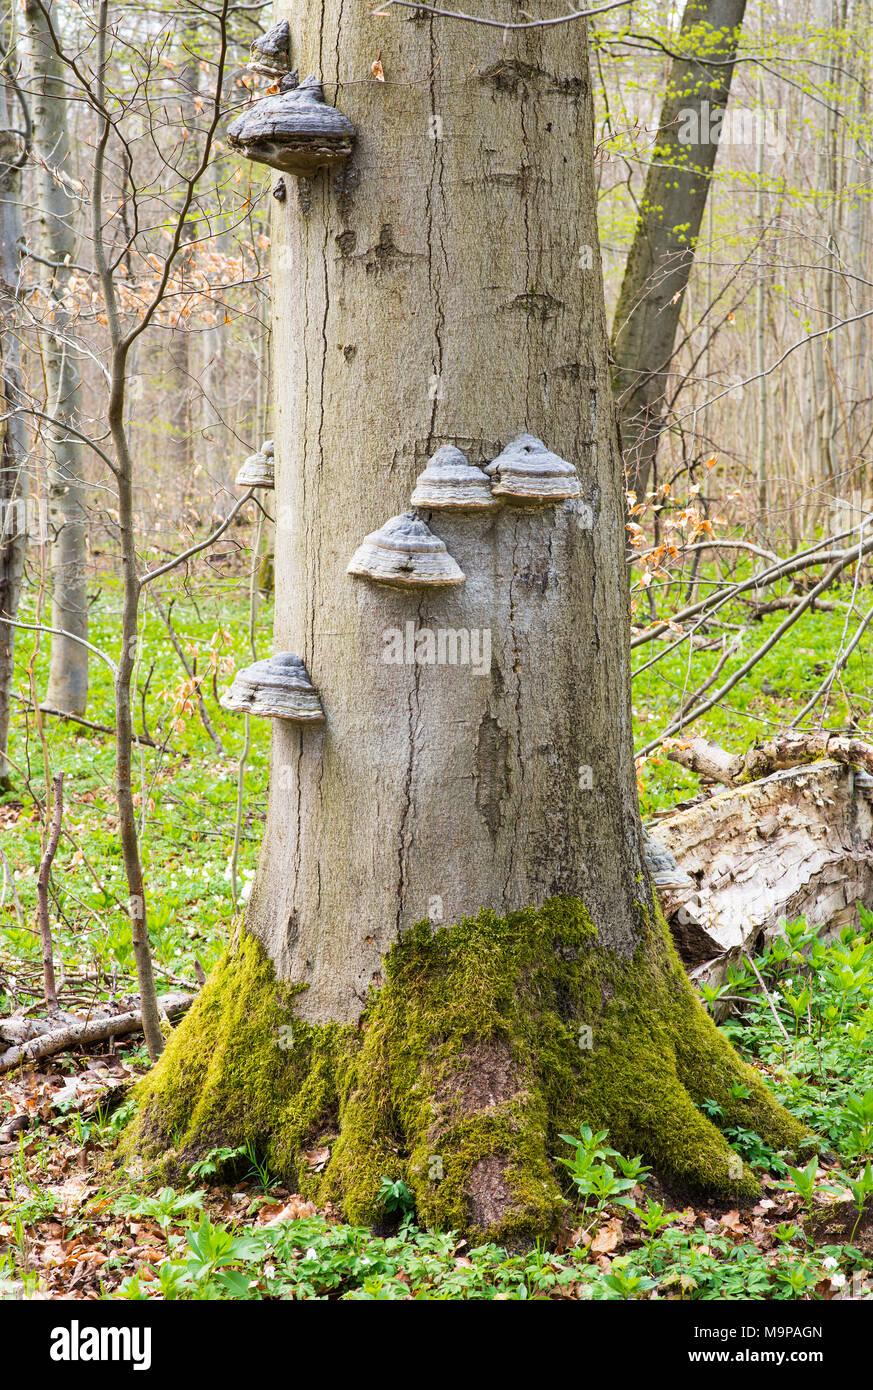 Tinder Fungus (Fomes fomentarius) on Common beech (Fagus sylvatica), Hainich National Park, Thuringia, Germany Stock Photo